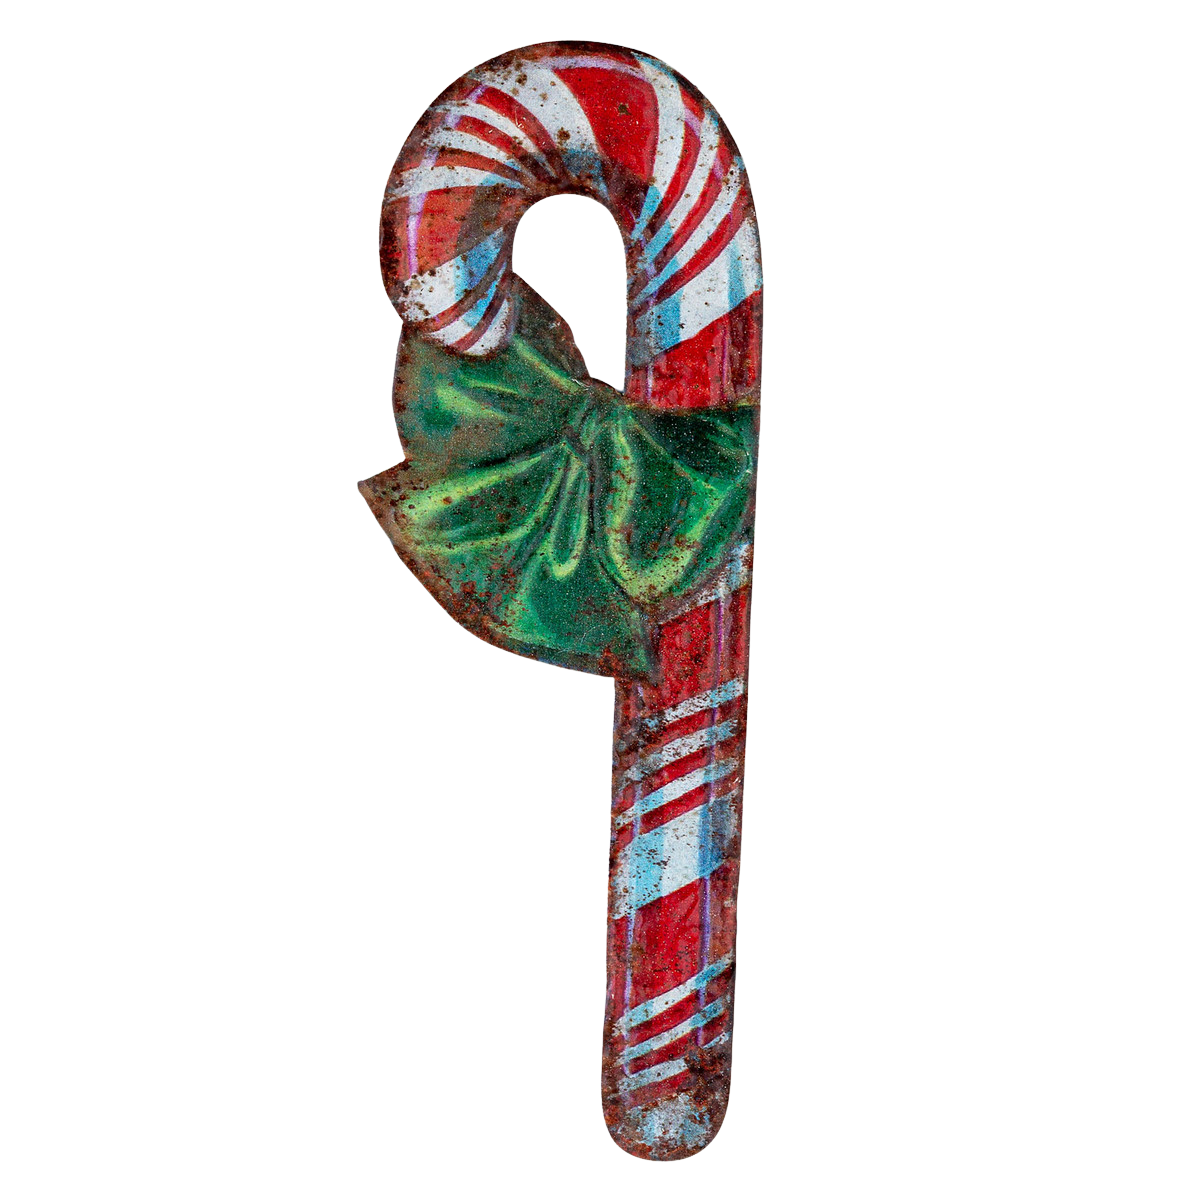 Vintage Candy Cane Wall Plaque